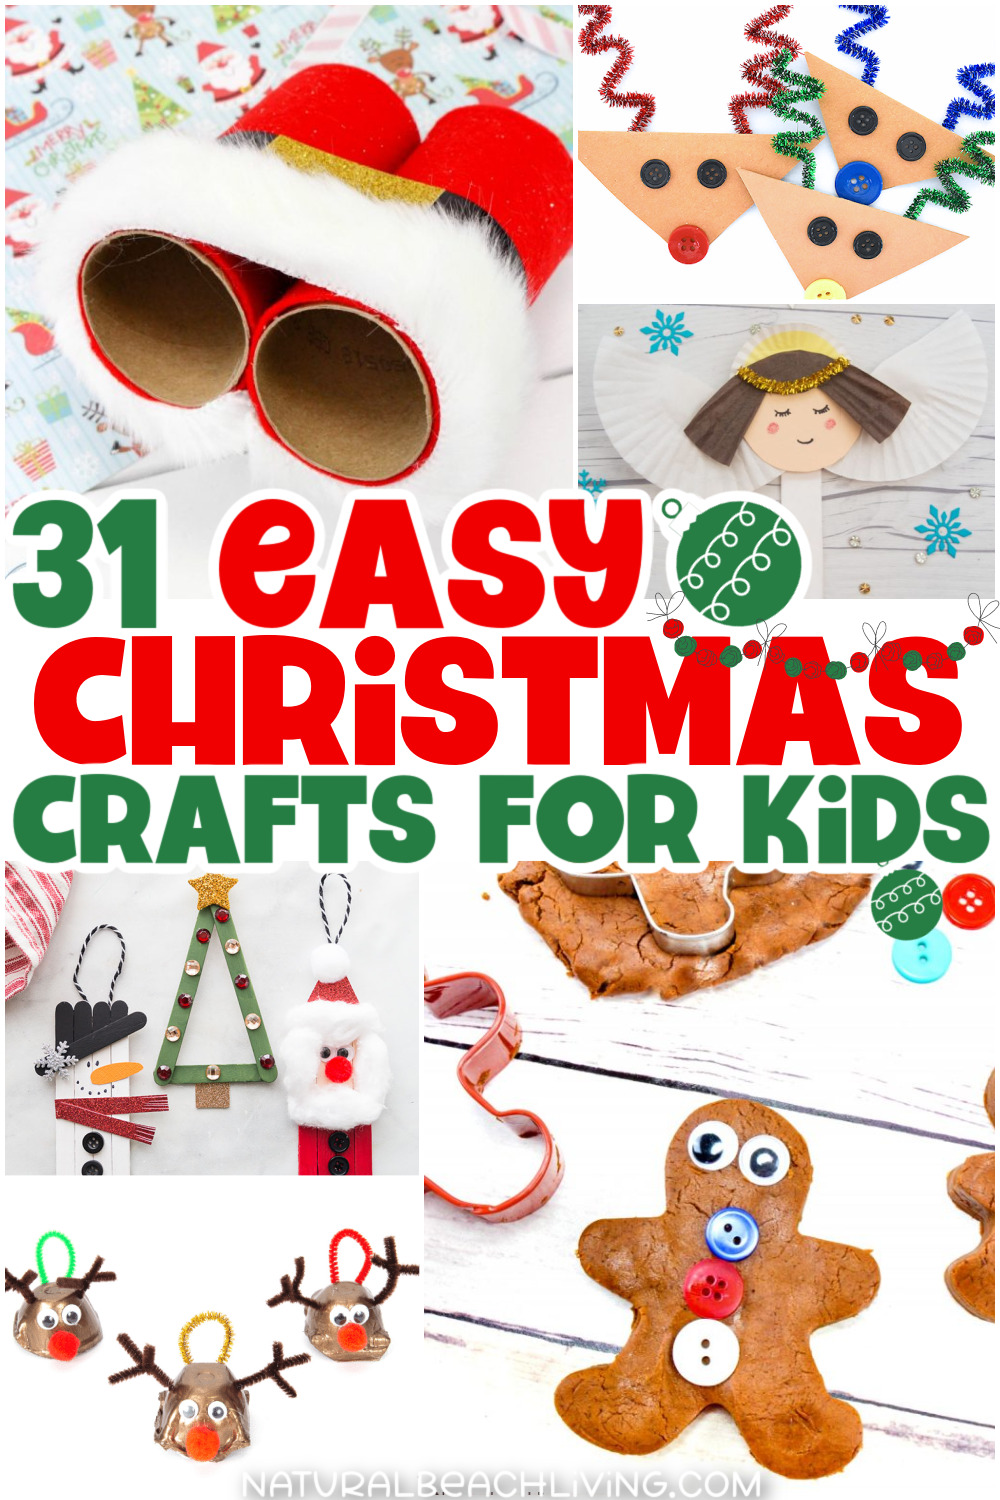 36 easy Christmas crafts for adults that will make any home fit for a visit from Santa. From wreaths and snow globes to candles and tree decorations, look at all these simple ideas and find a few fun Christmas Crafts that you'd like to create! 